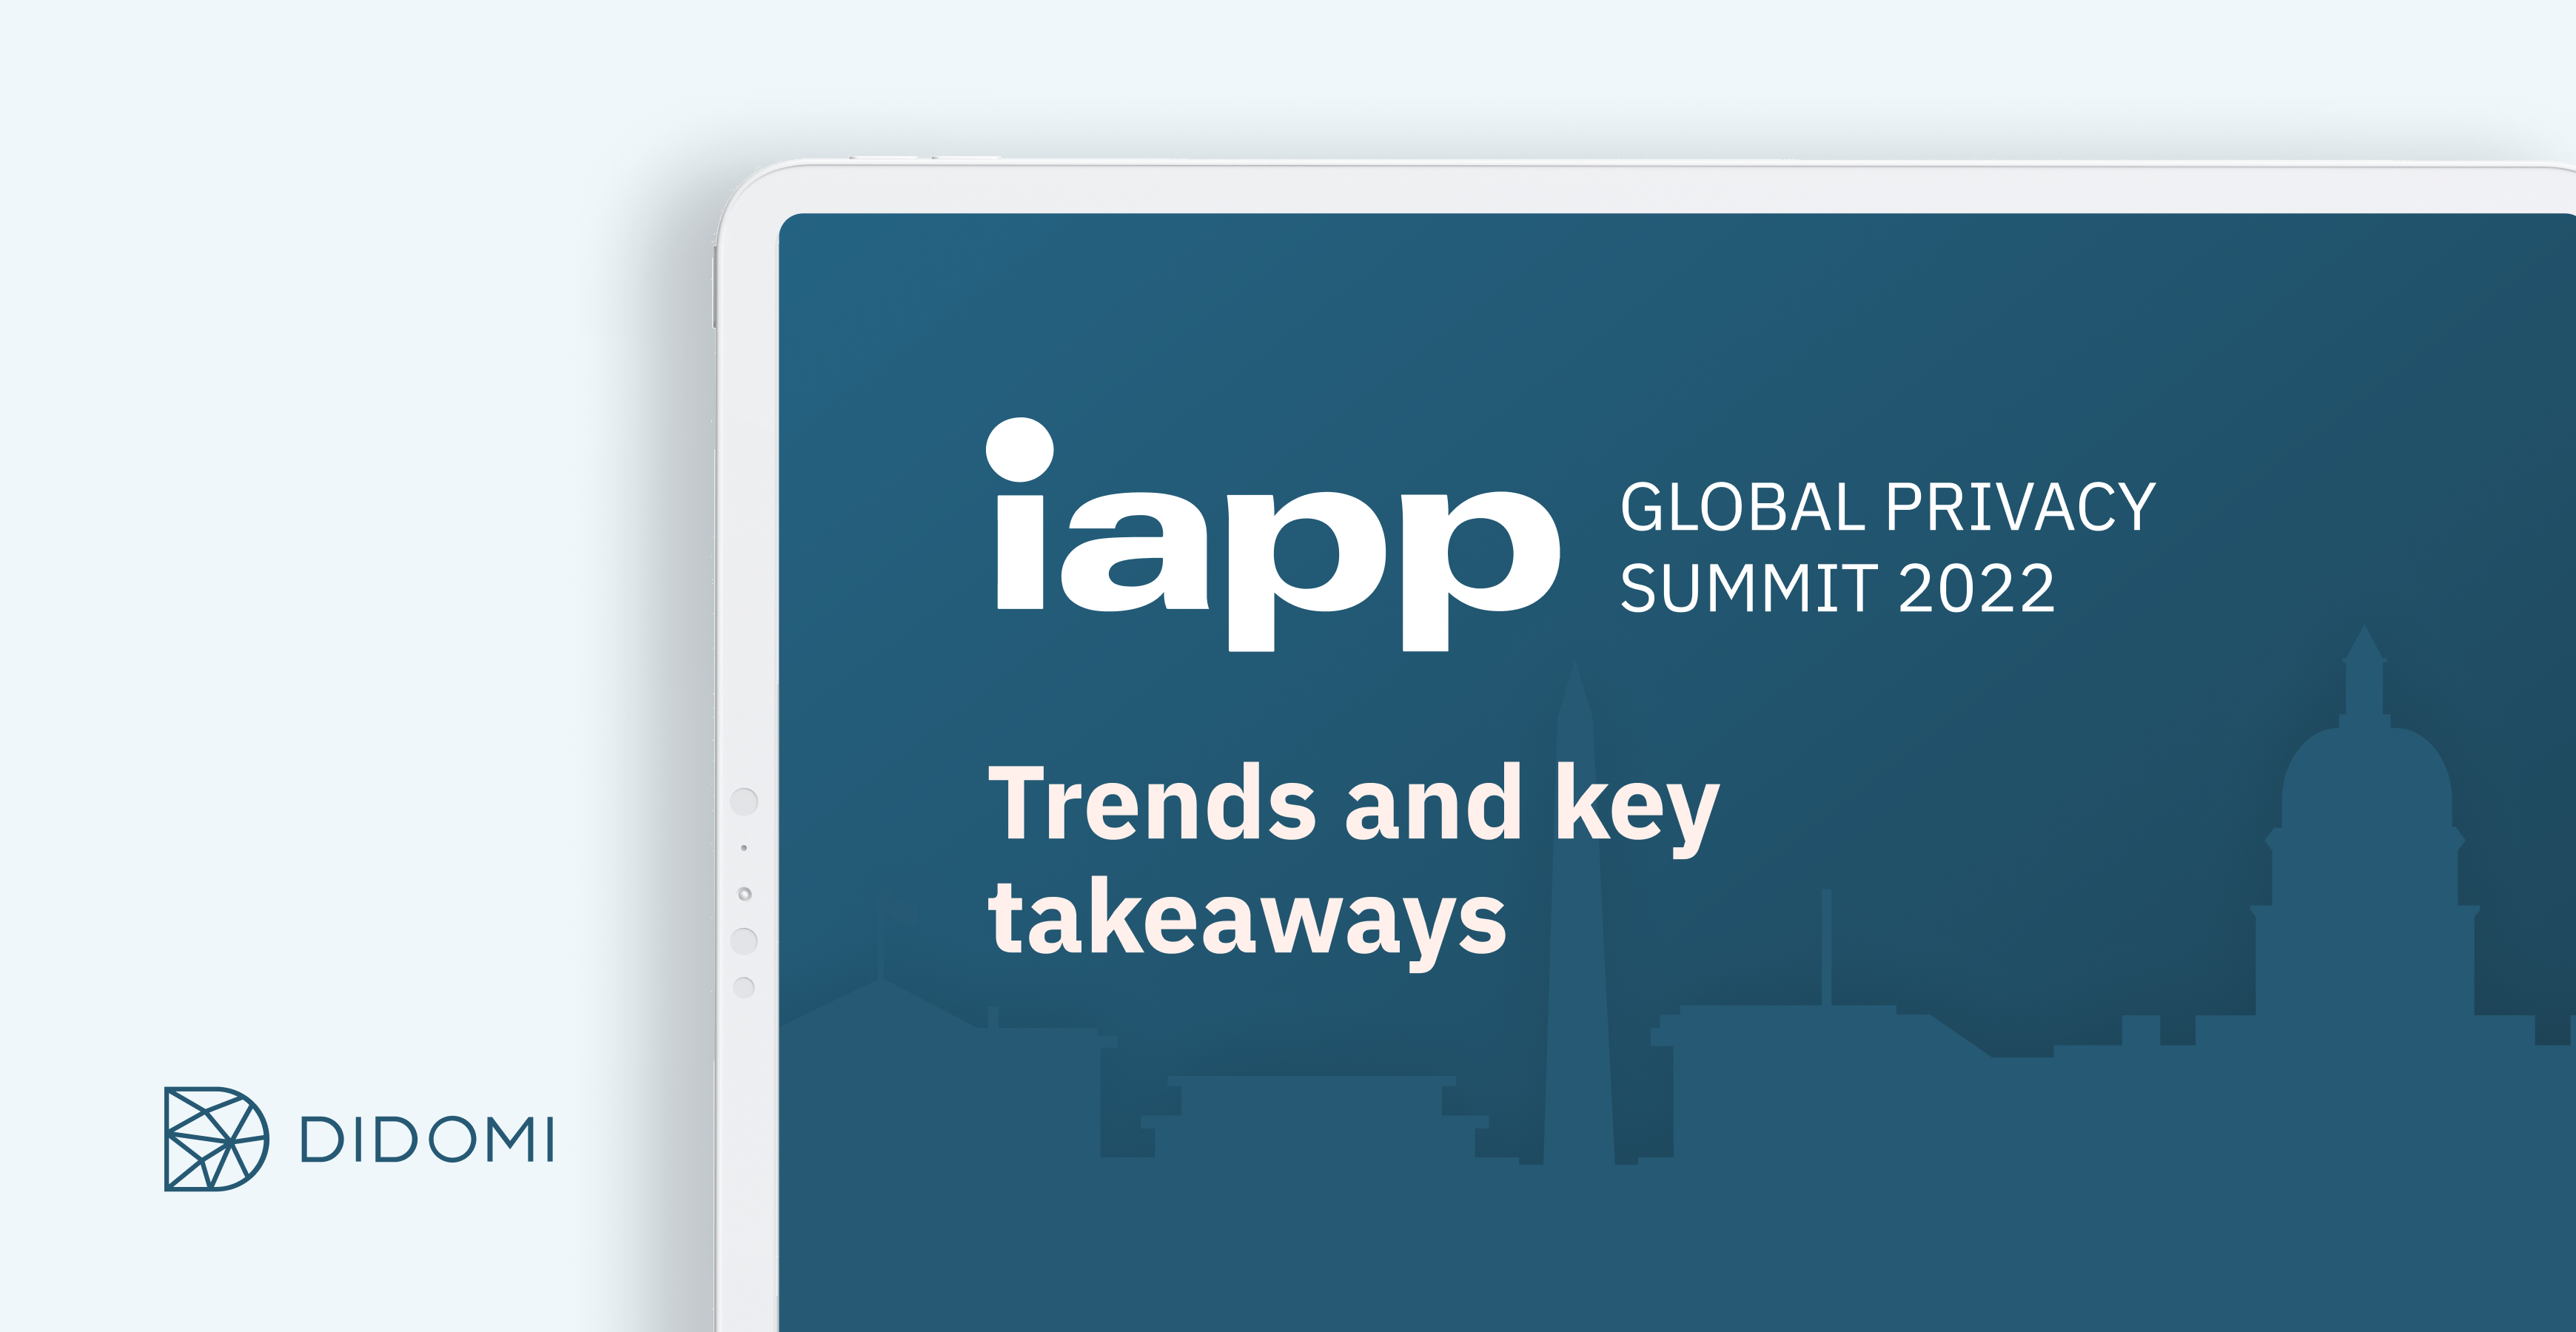 Trends and takeaways from the IAPP Global Privacy Summit 2022